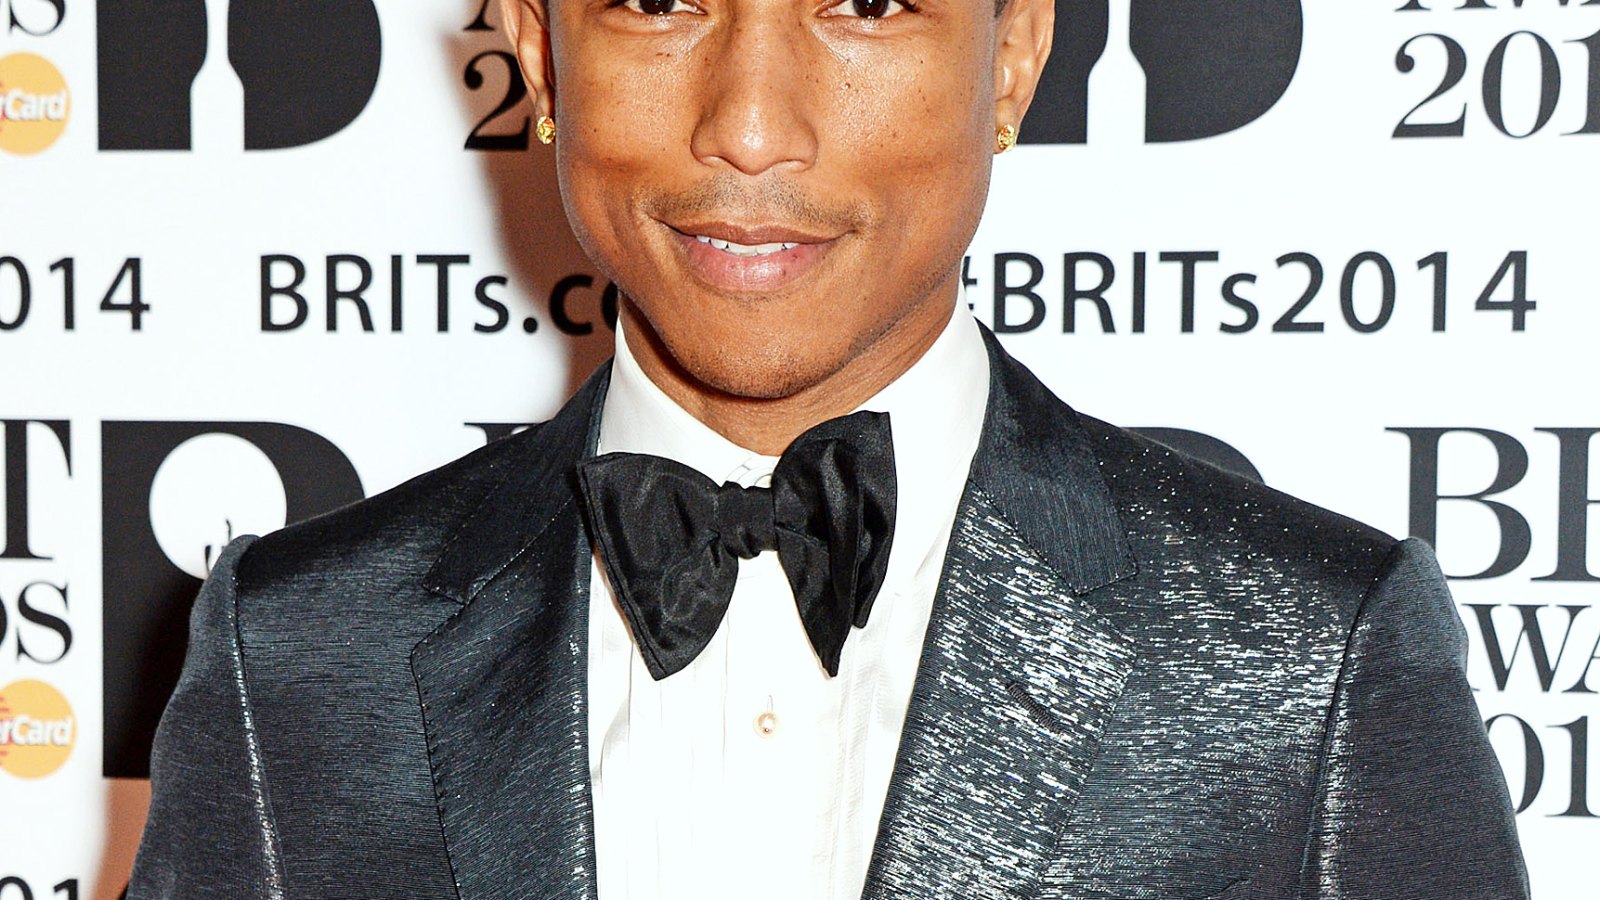 25 Things You Don't Know About Pharrell Williams